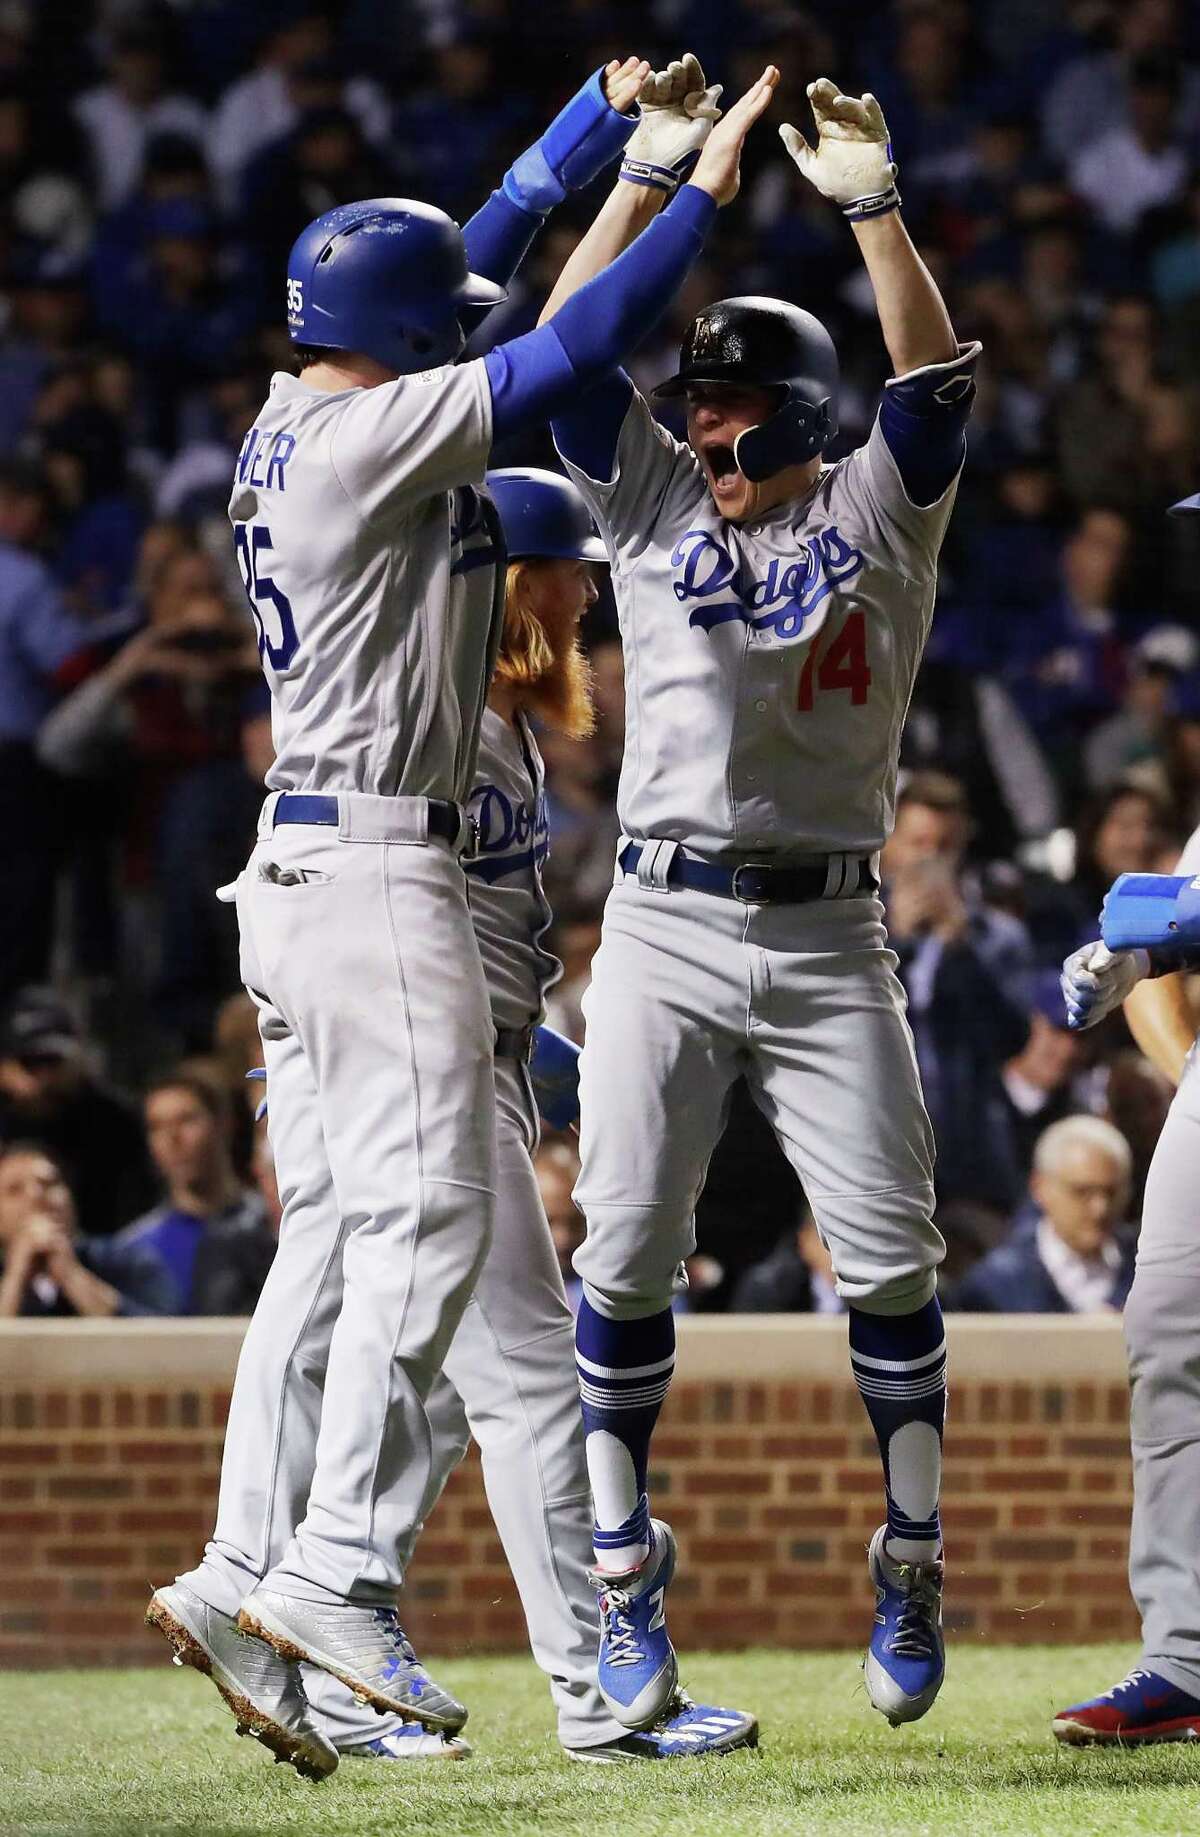 CHICAGO, IL - OCTOBER 19: Cody Bellinger #35 and Enrique Hernandez #14 of the Los Angeles Dodgers celebrate after Hernandez hit a grand slam in the third inning against the Chicago Cubs during game five of the National League Championship Series at Wrigley Field on October 19, 2017 in Chicago, Illinois. (Photo by Jamie Squire/Getty Images)